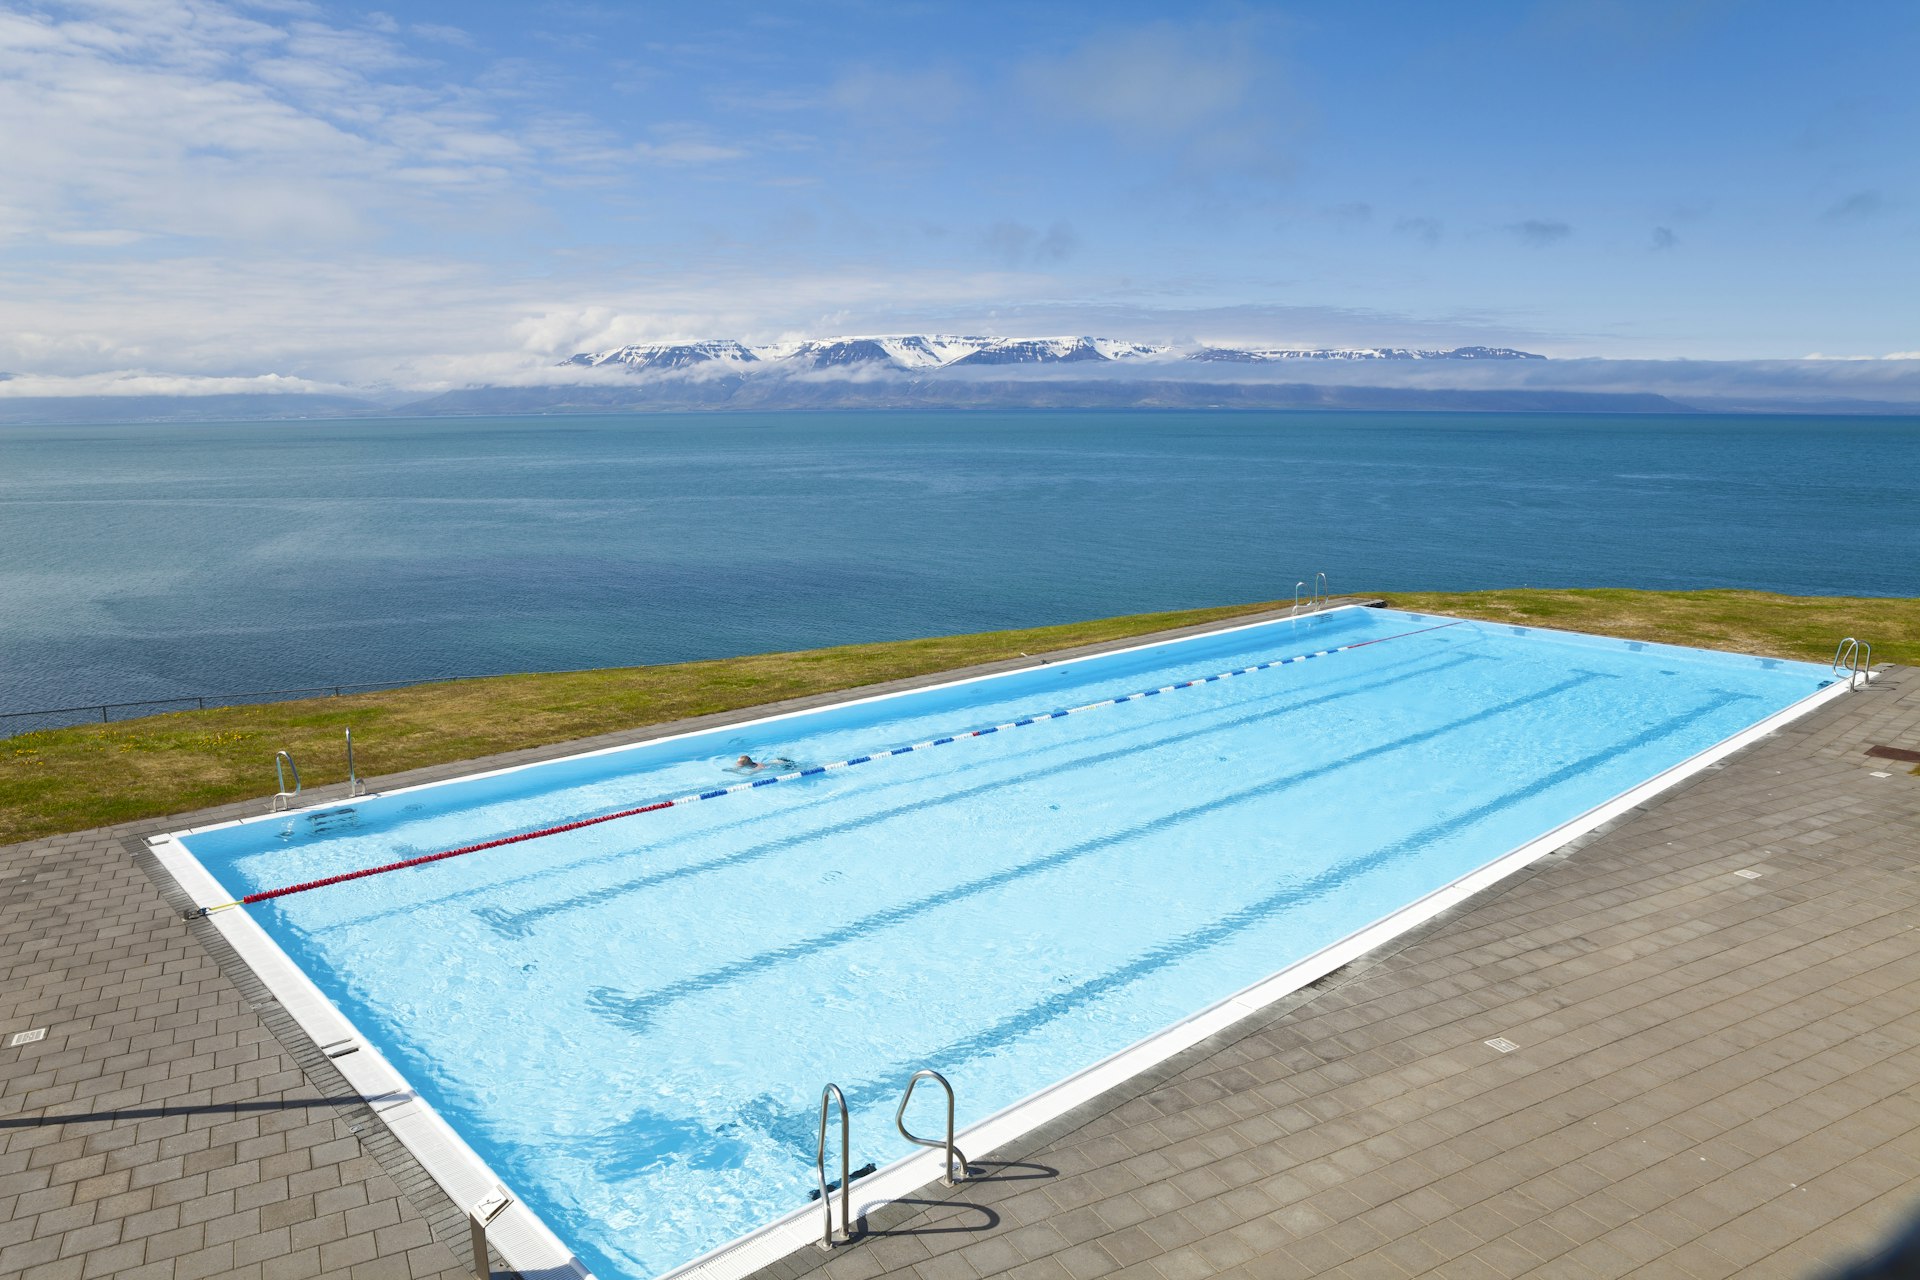 A bright-blue swimming pool on the edge of the sea, providing an infinity pool vibe